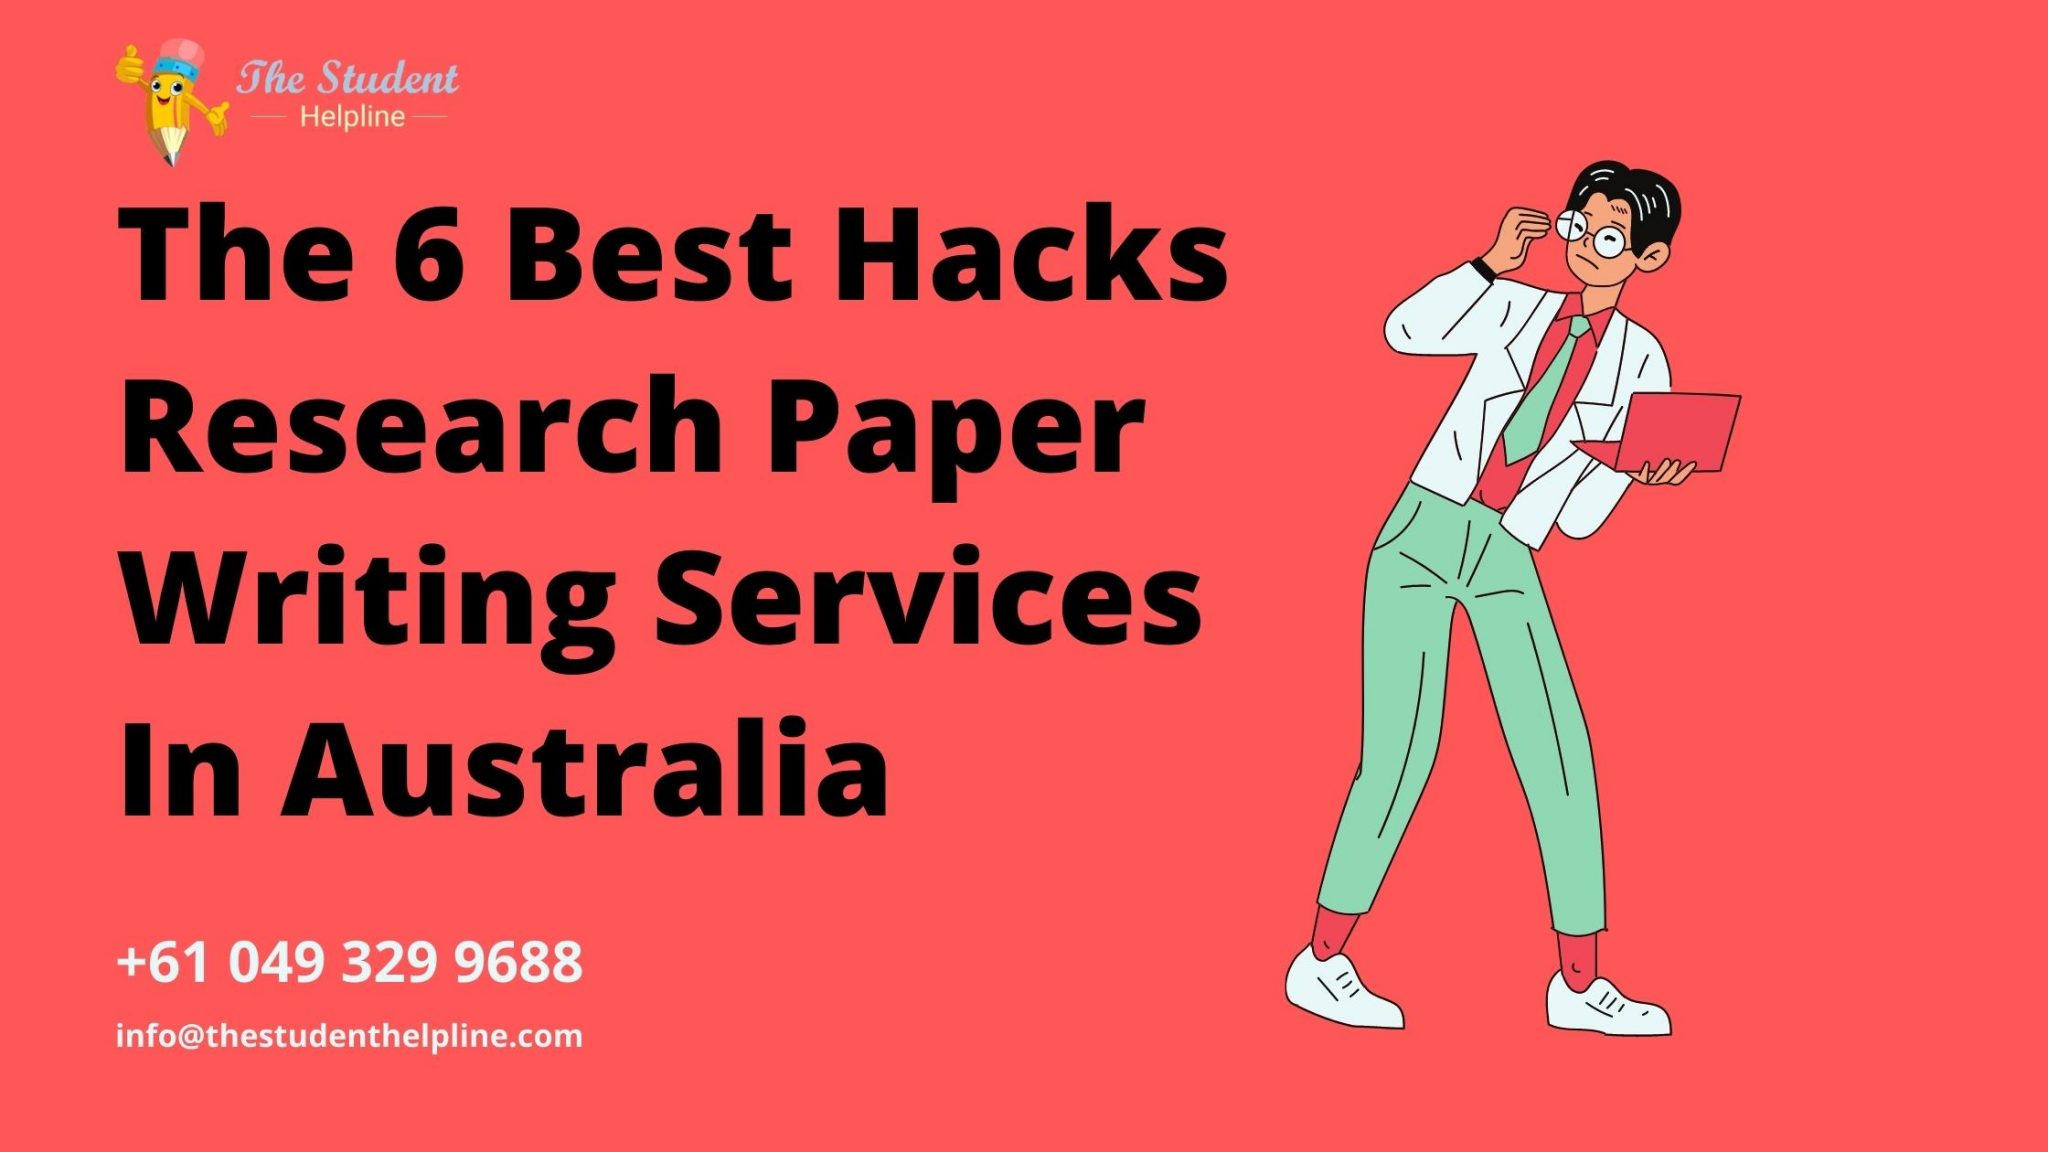 The 6 Best Hacks Research Paper Writing Services In Australia